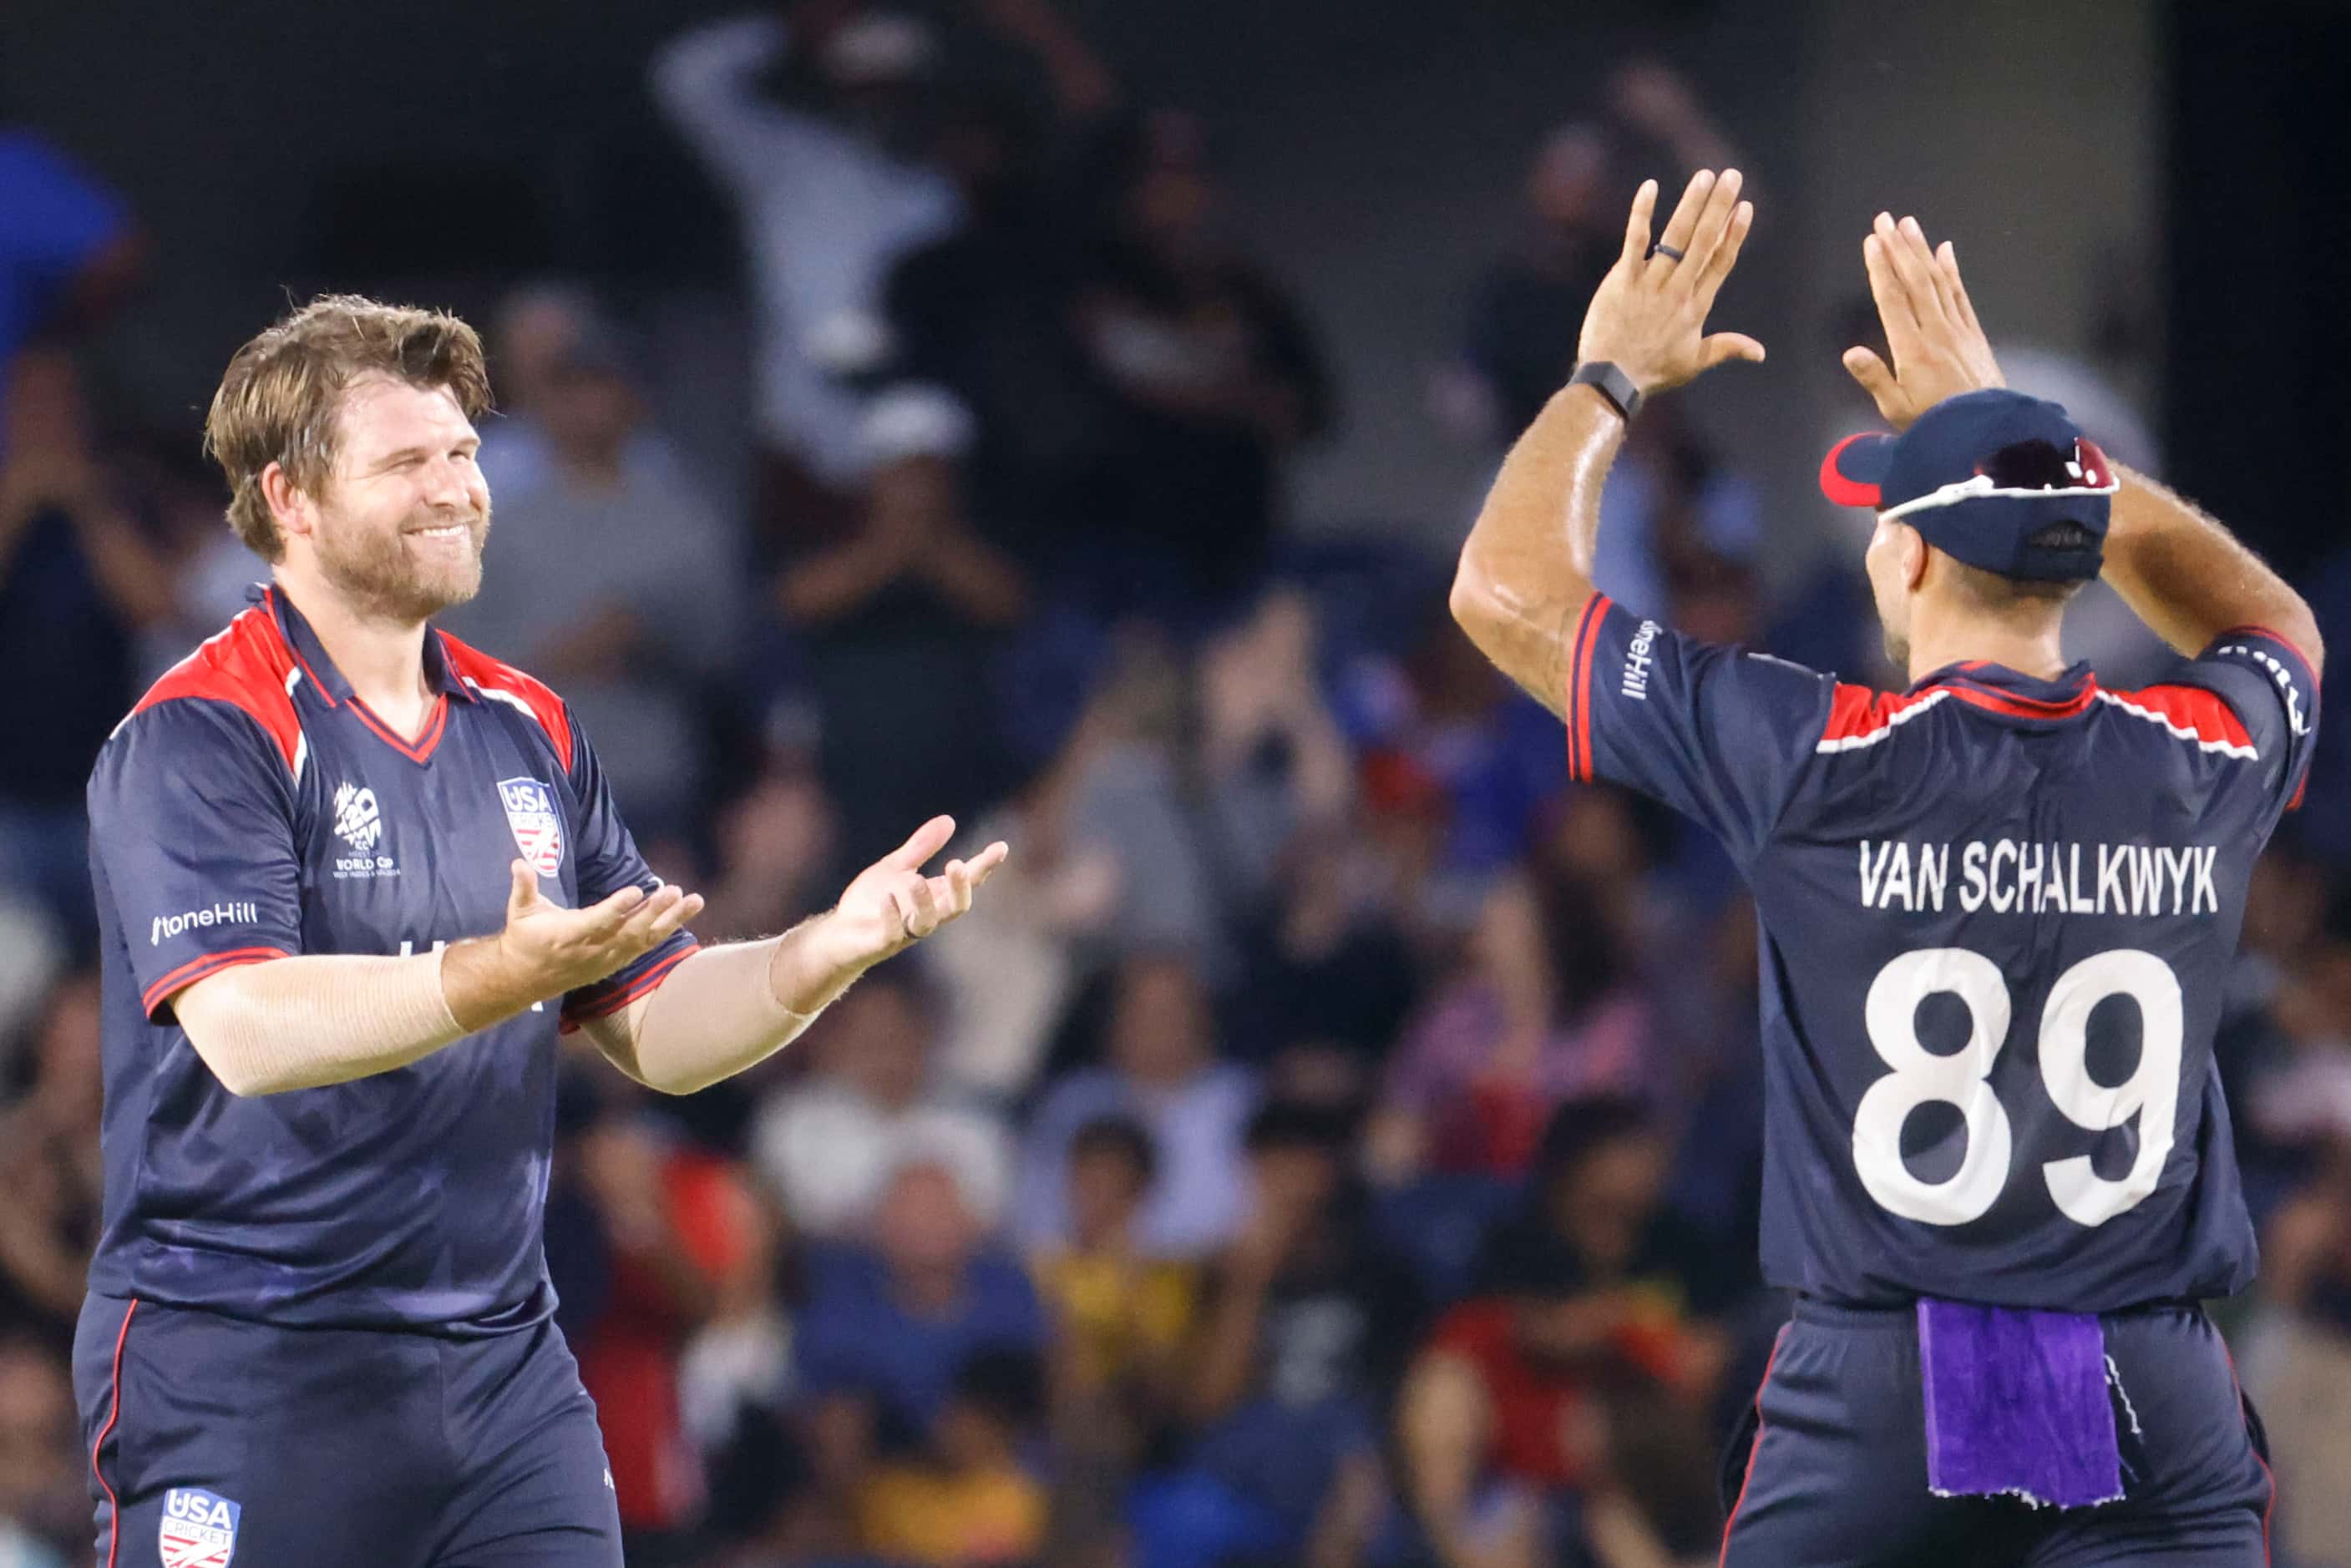 United States' Corey Anderson is congratulated by his team mate Shadley van Schalkwyk during...